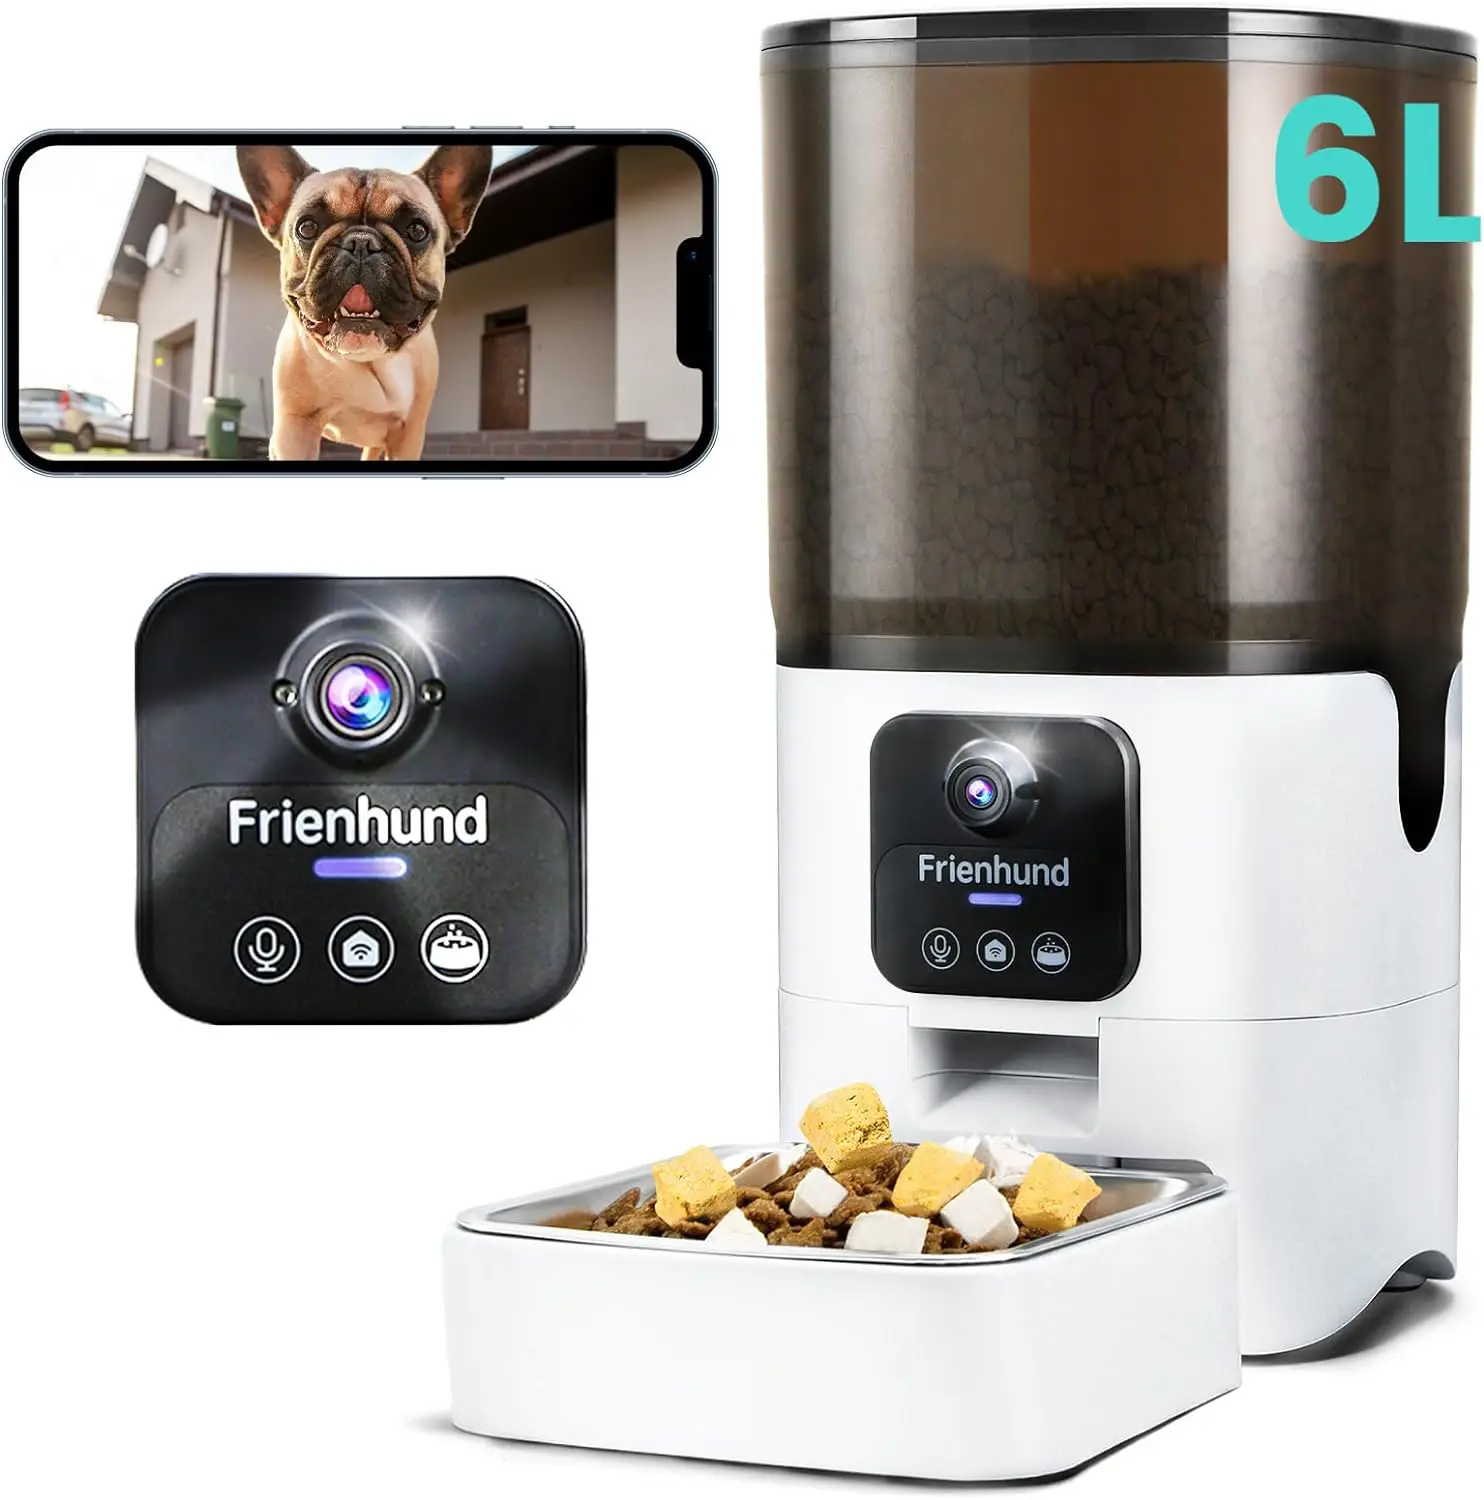 Automatic Cat Food Dispenser Cat Feeder with Camera, Frienhund 1080P Camera 6L Cat Feeder with Remote APP Control, Automatic Dog Feeder Support 5G WiFi, Pet Feeder Auto Dog Puppy Feeder